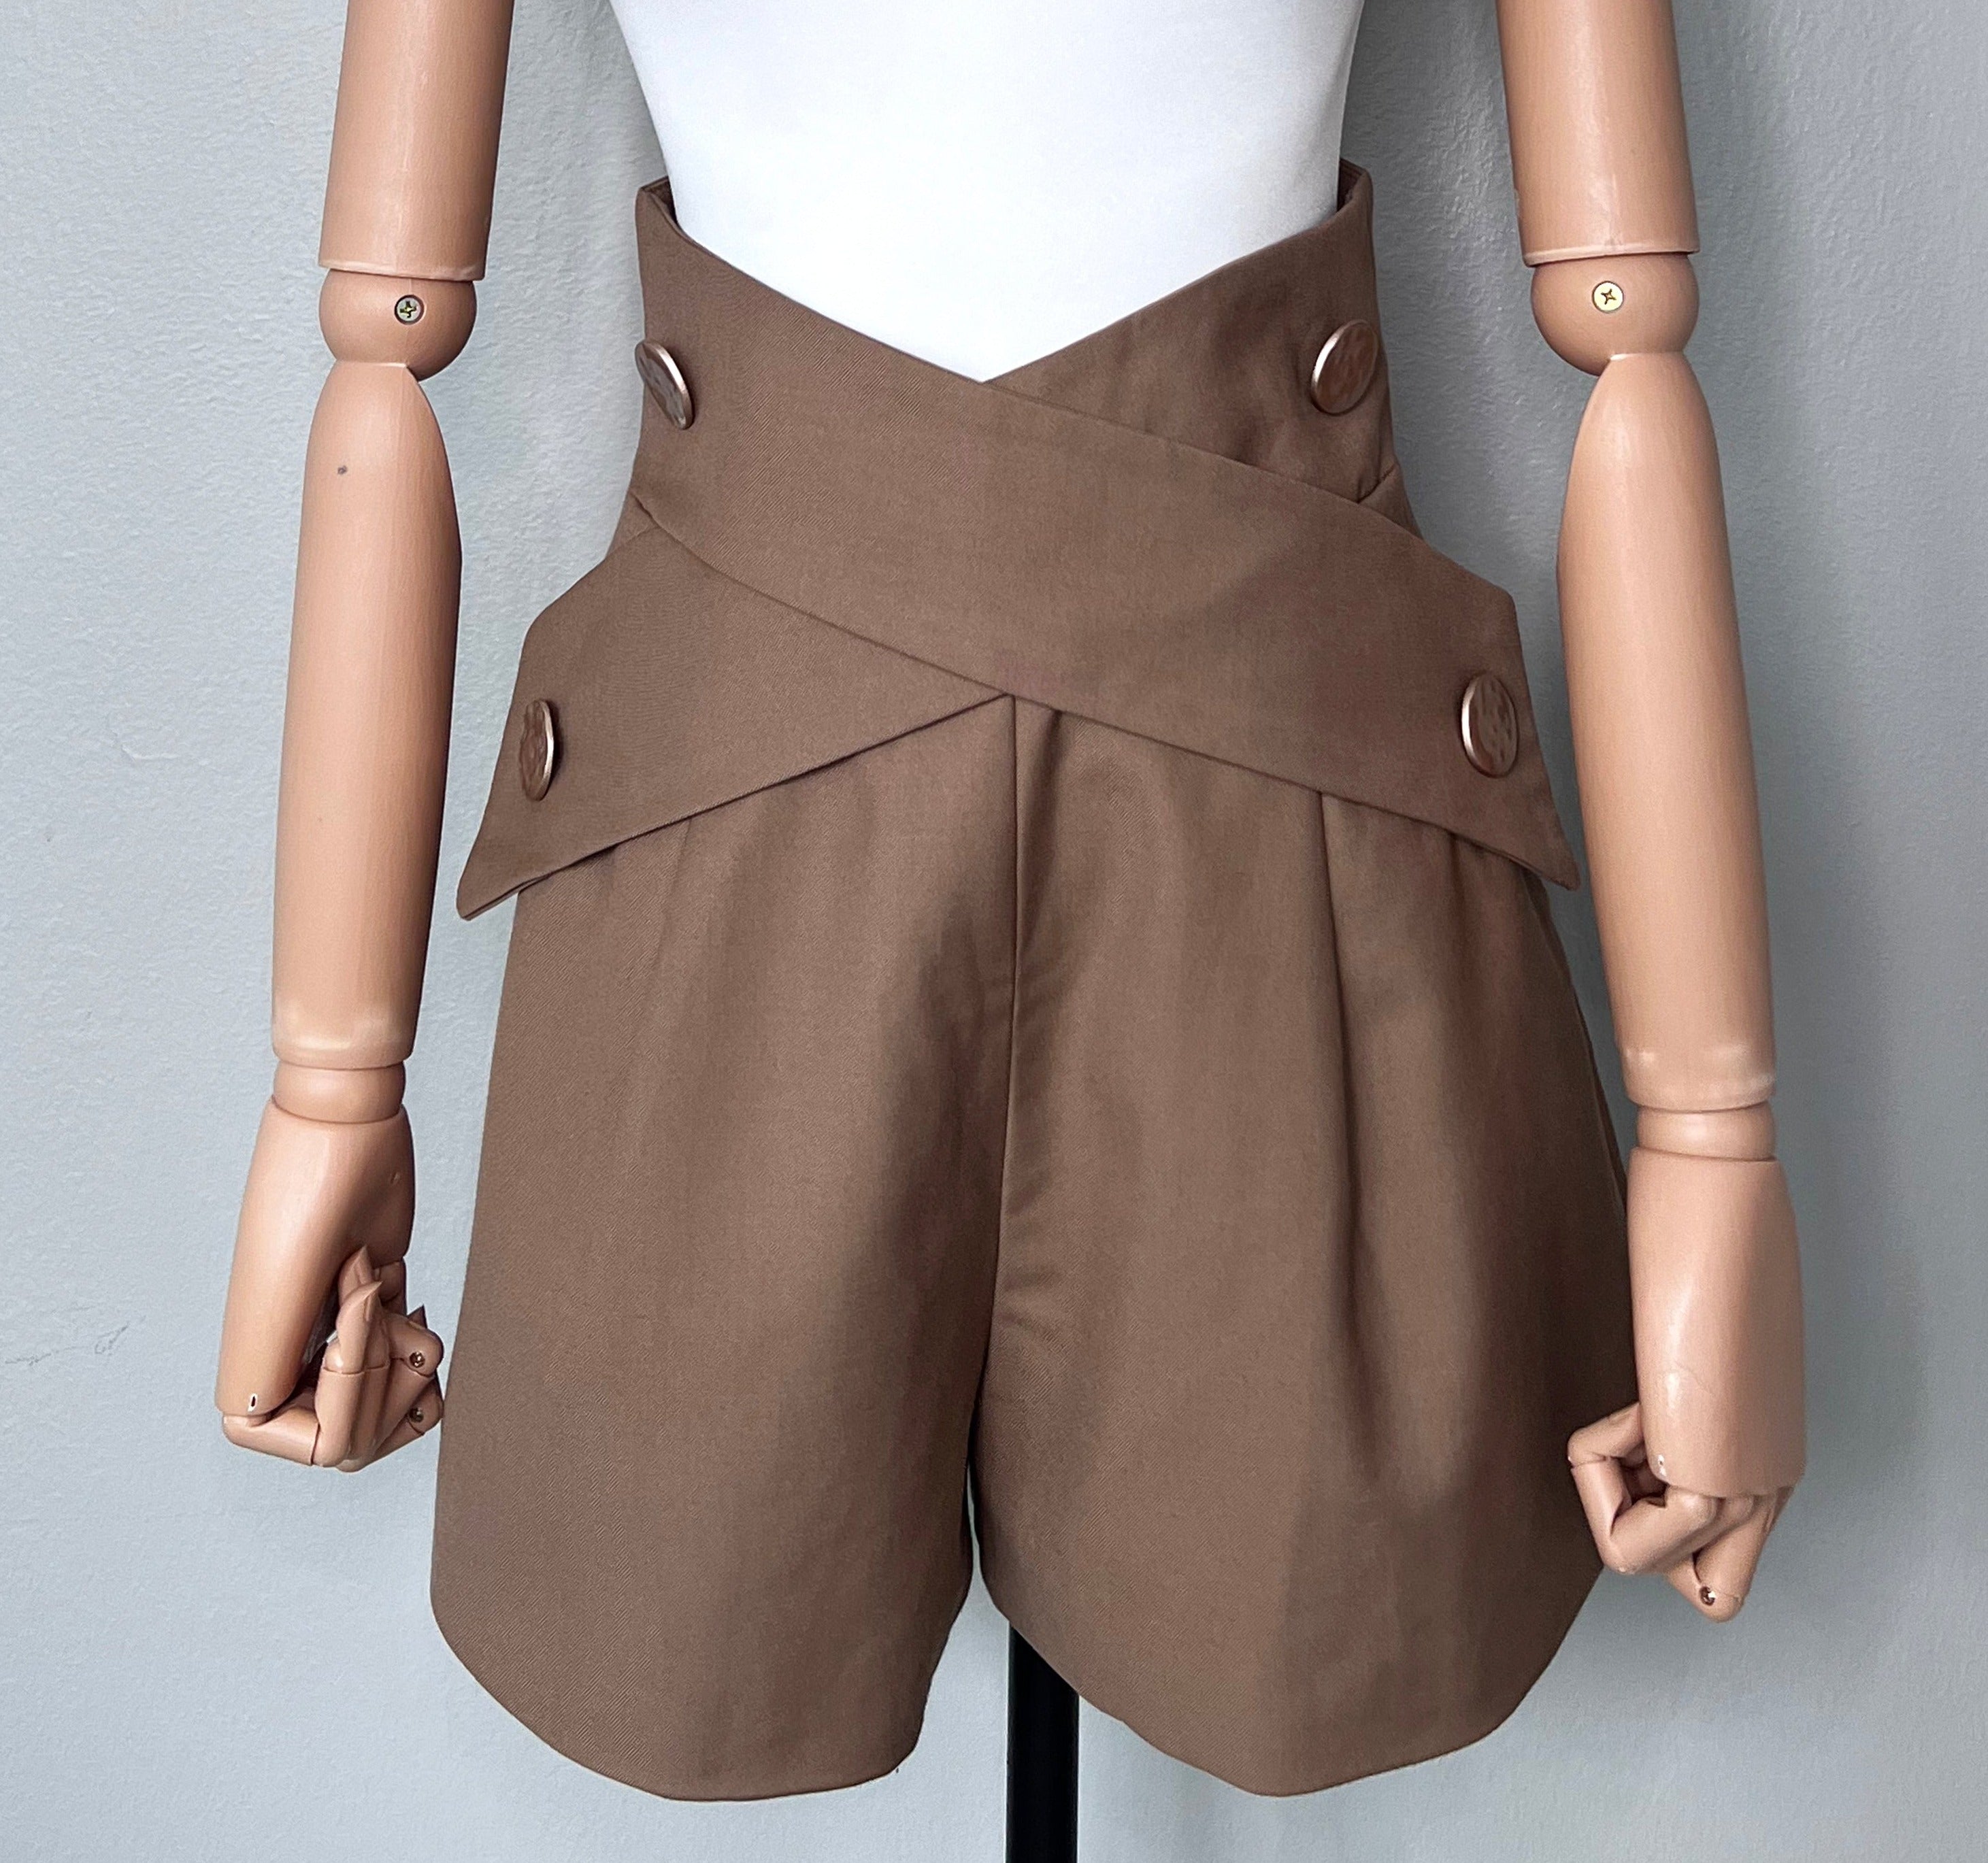 Brown high waist shorts with four button criss cross design - unbranded